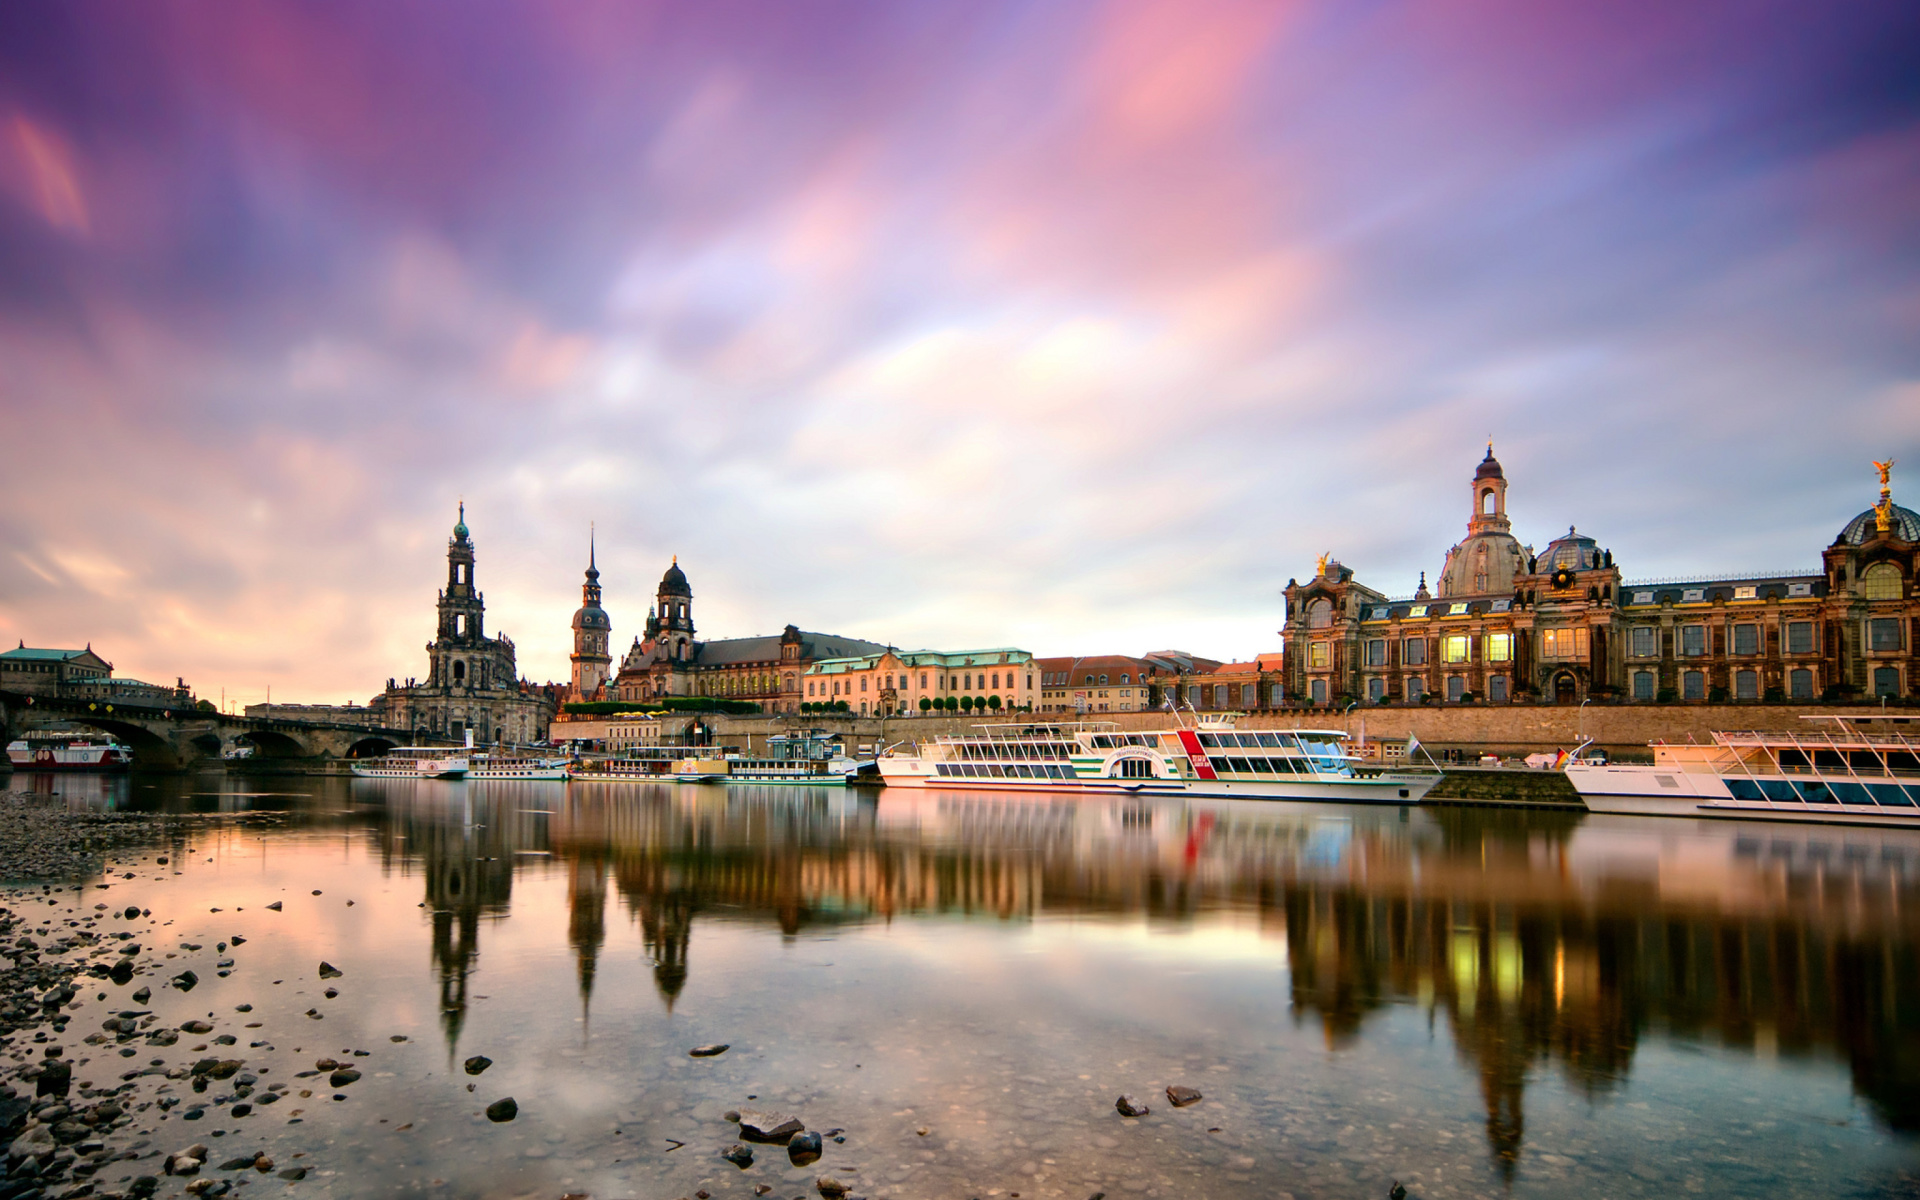 Dresden on Elbe River near Zwinger Palace wallpaper 1920x1200